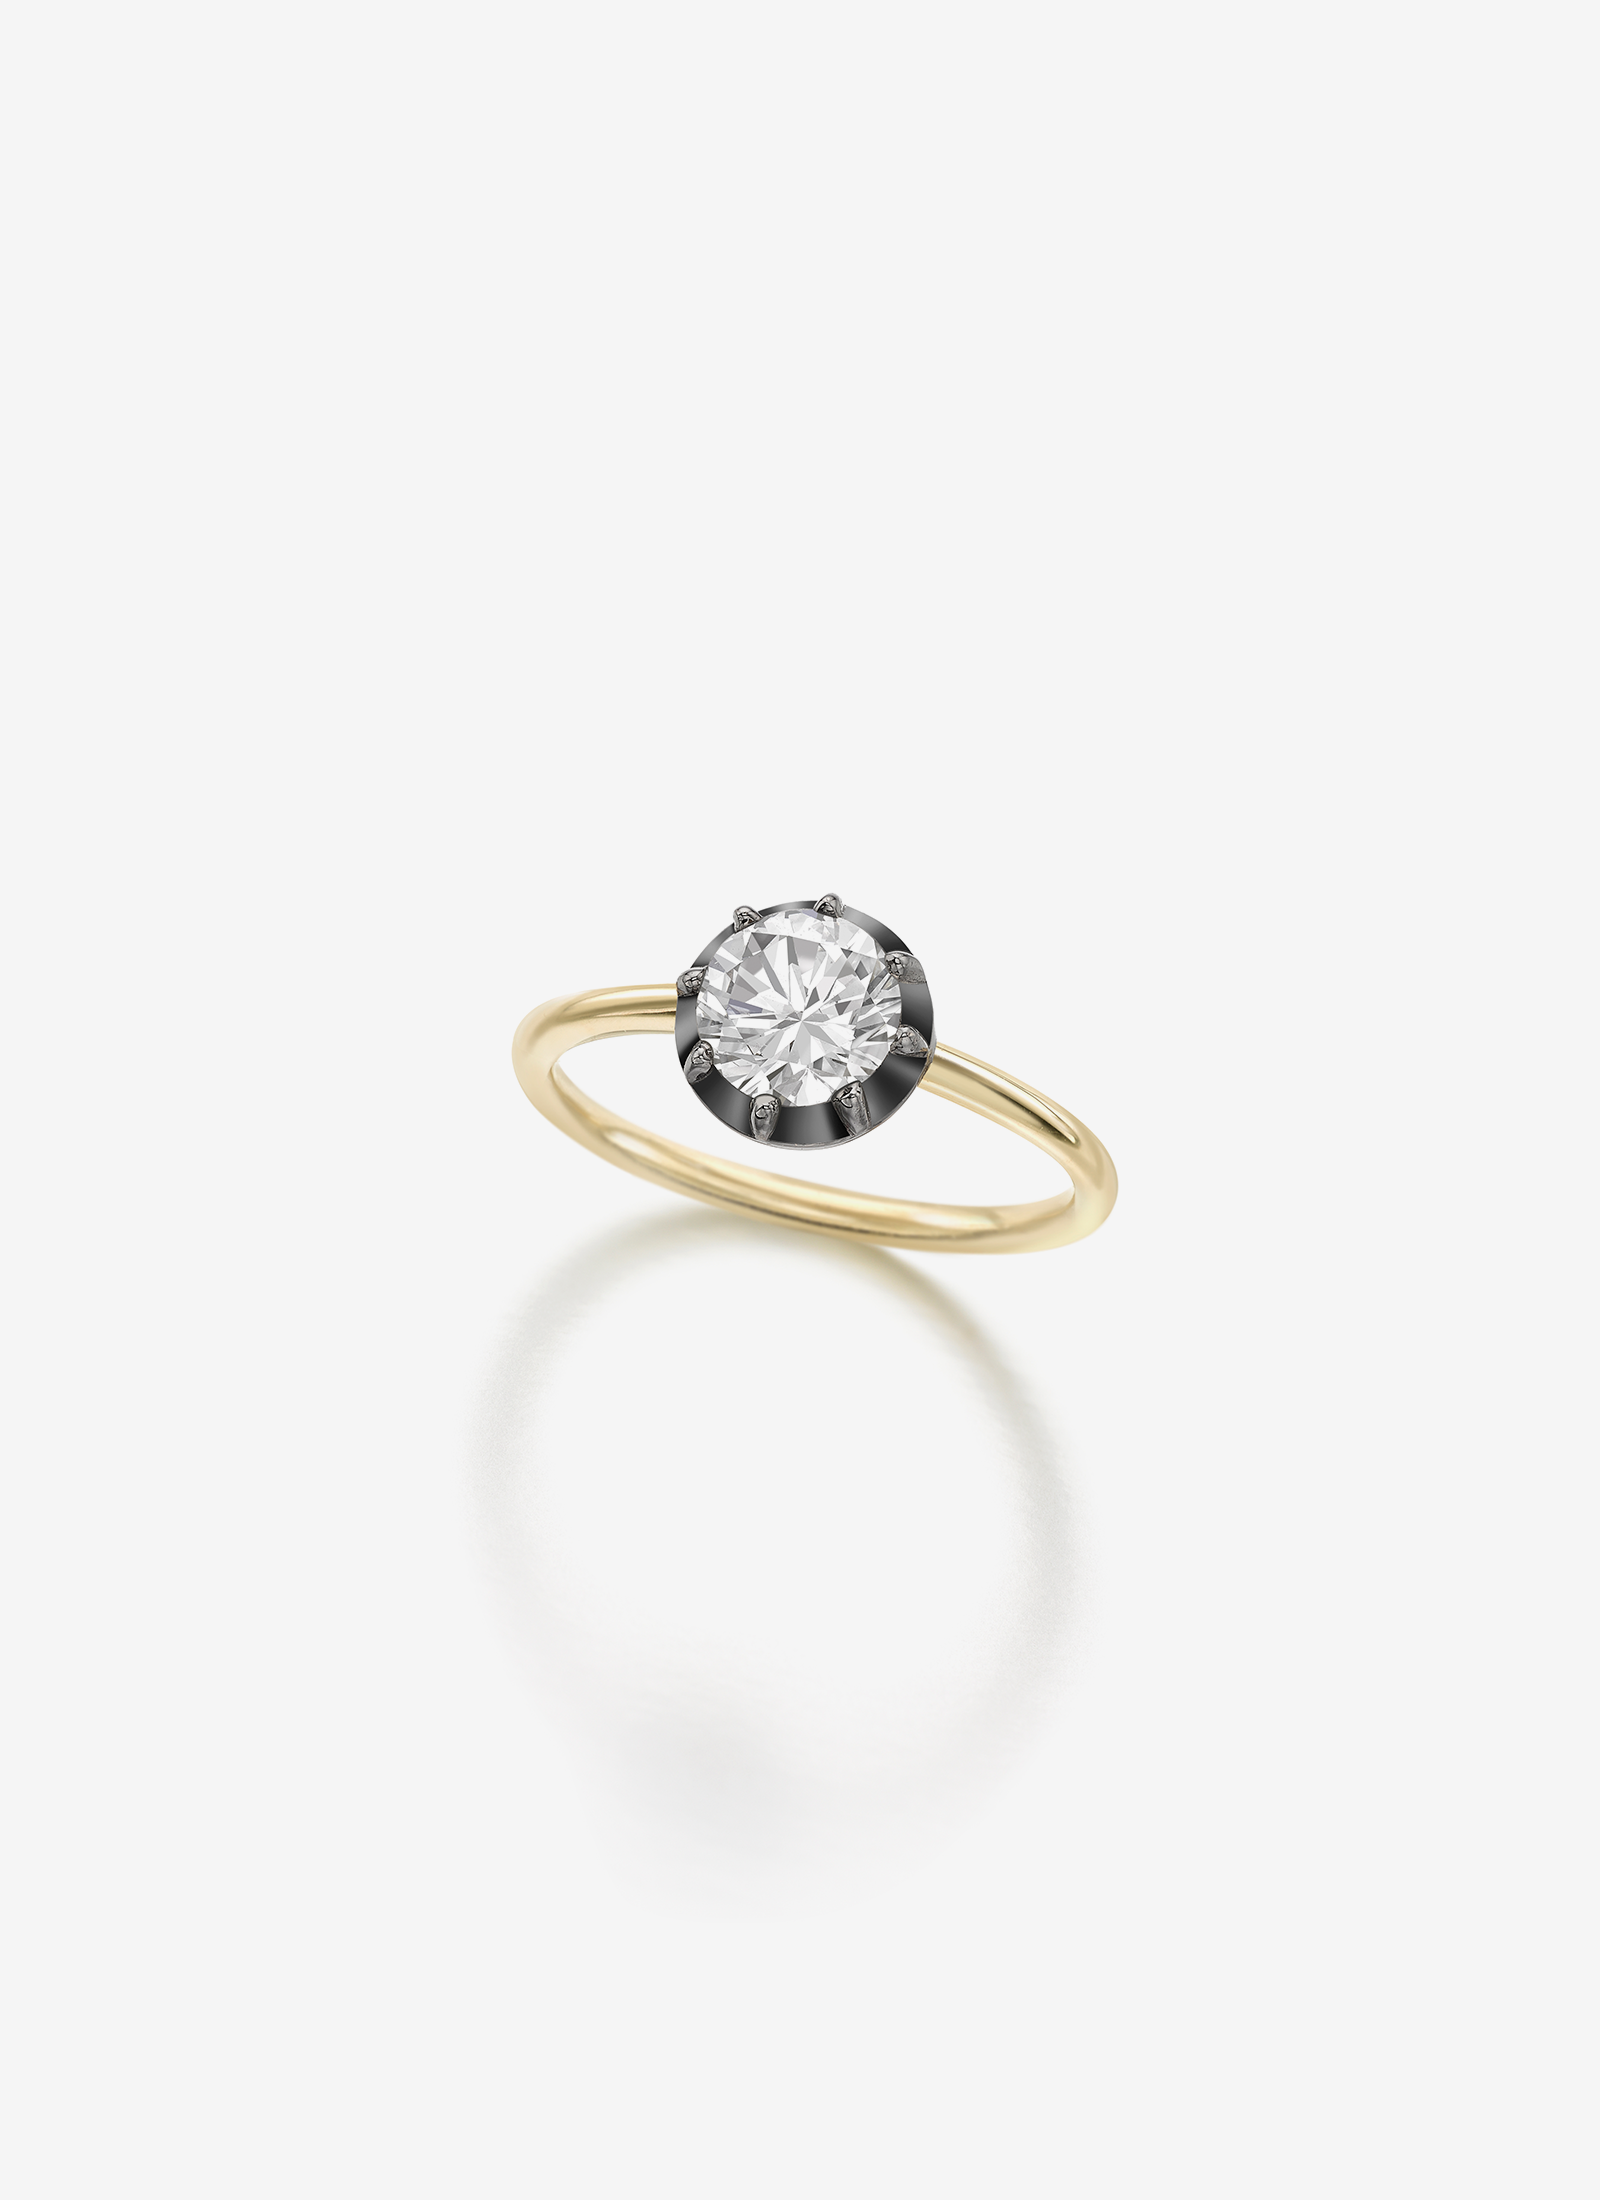 Button Back 0.90ct Diamond Ring - BWG